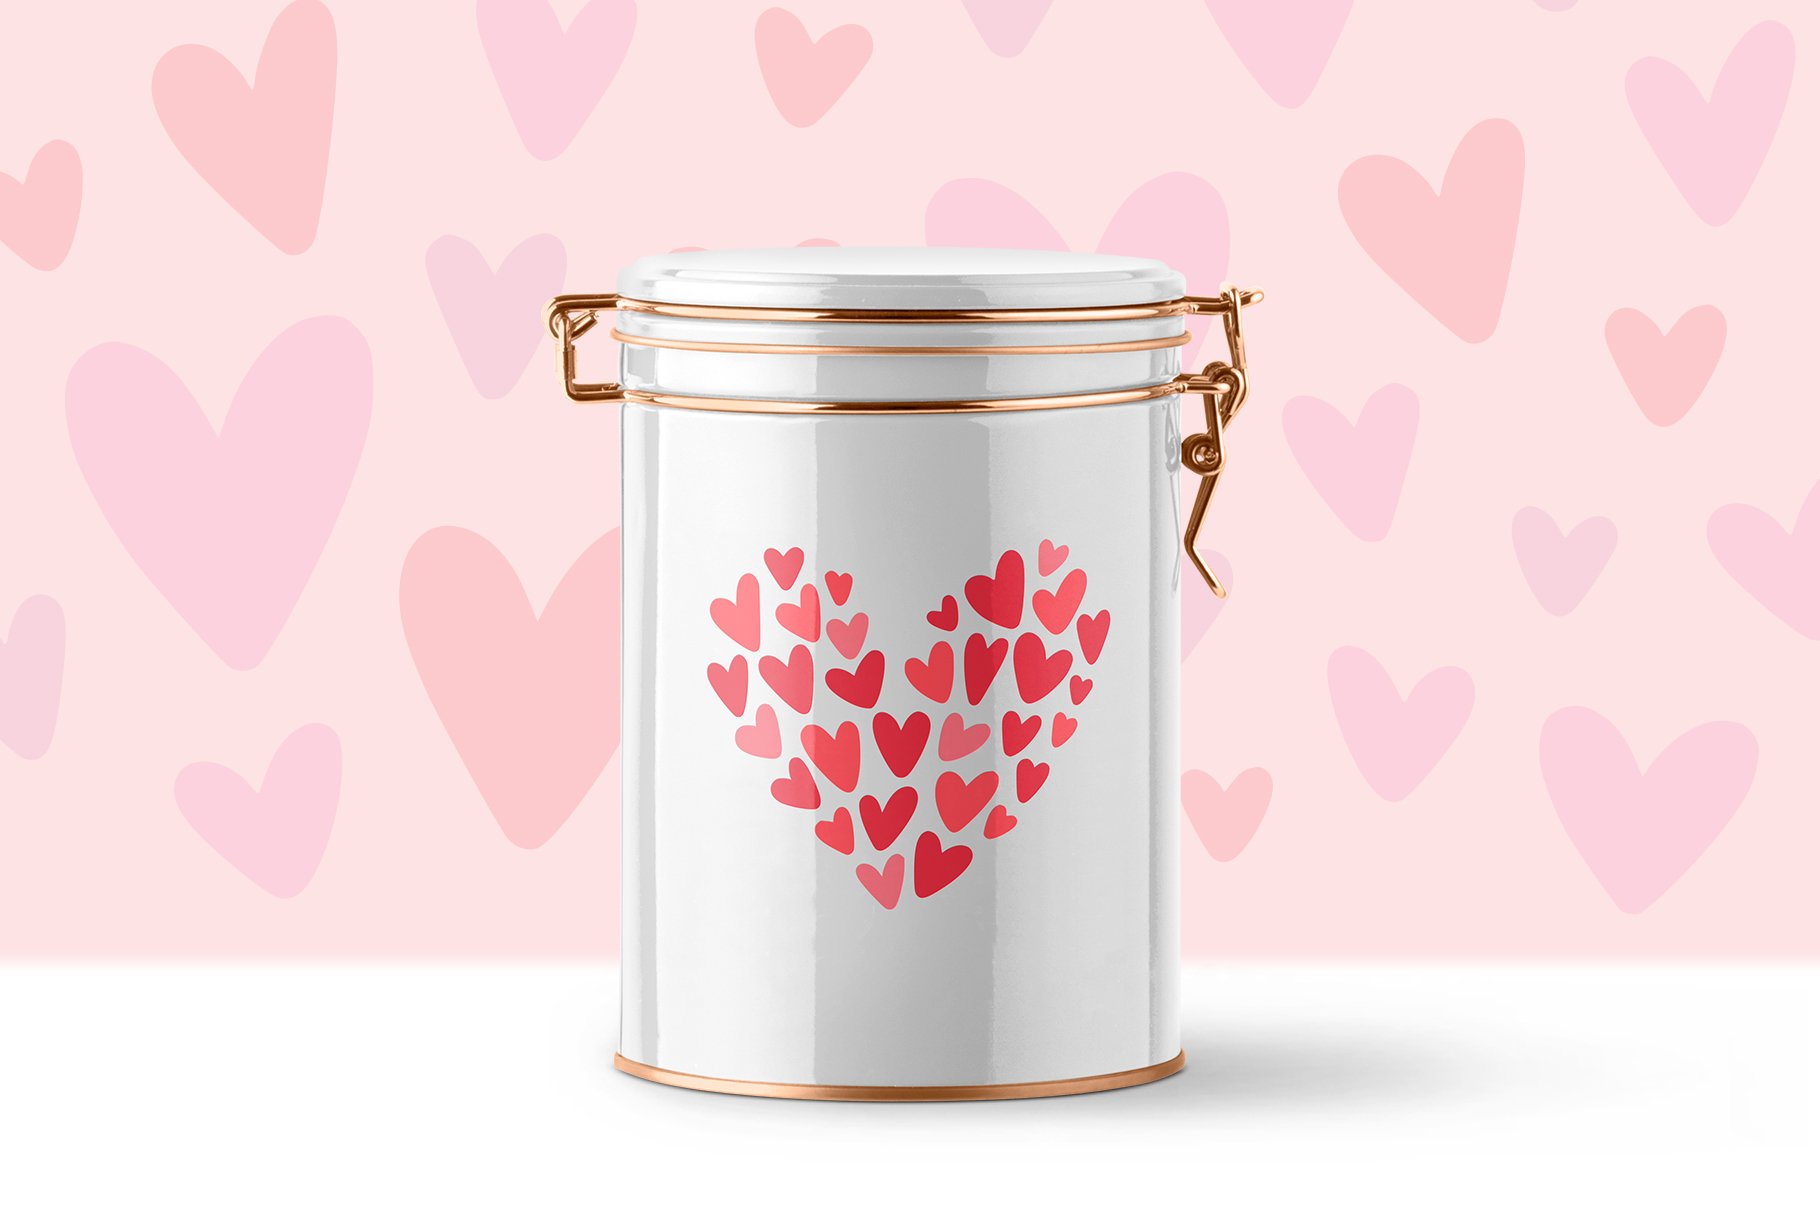 Cute jar with hearts preview design.